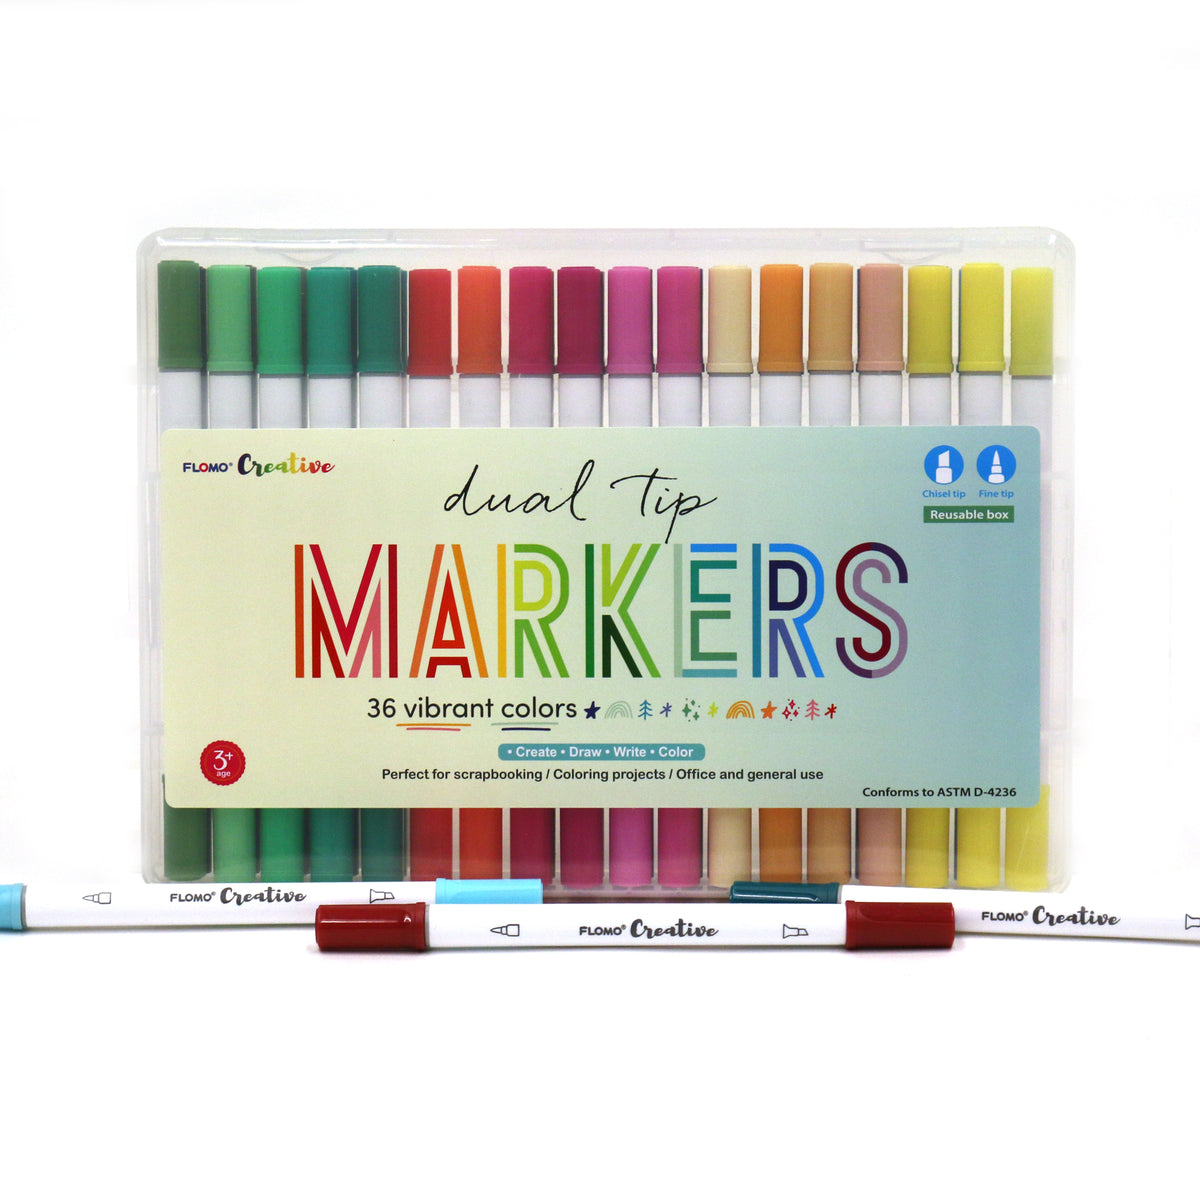 36 Set Bulk Markers Pack 8 Vibrant Marker Colors Washable Perfect for Kids  Party